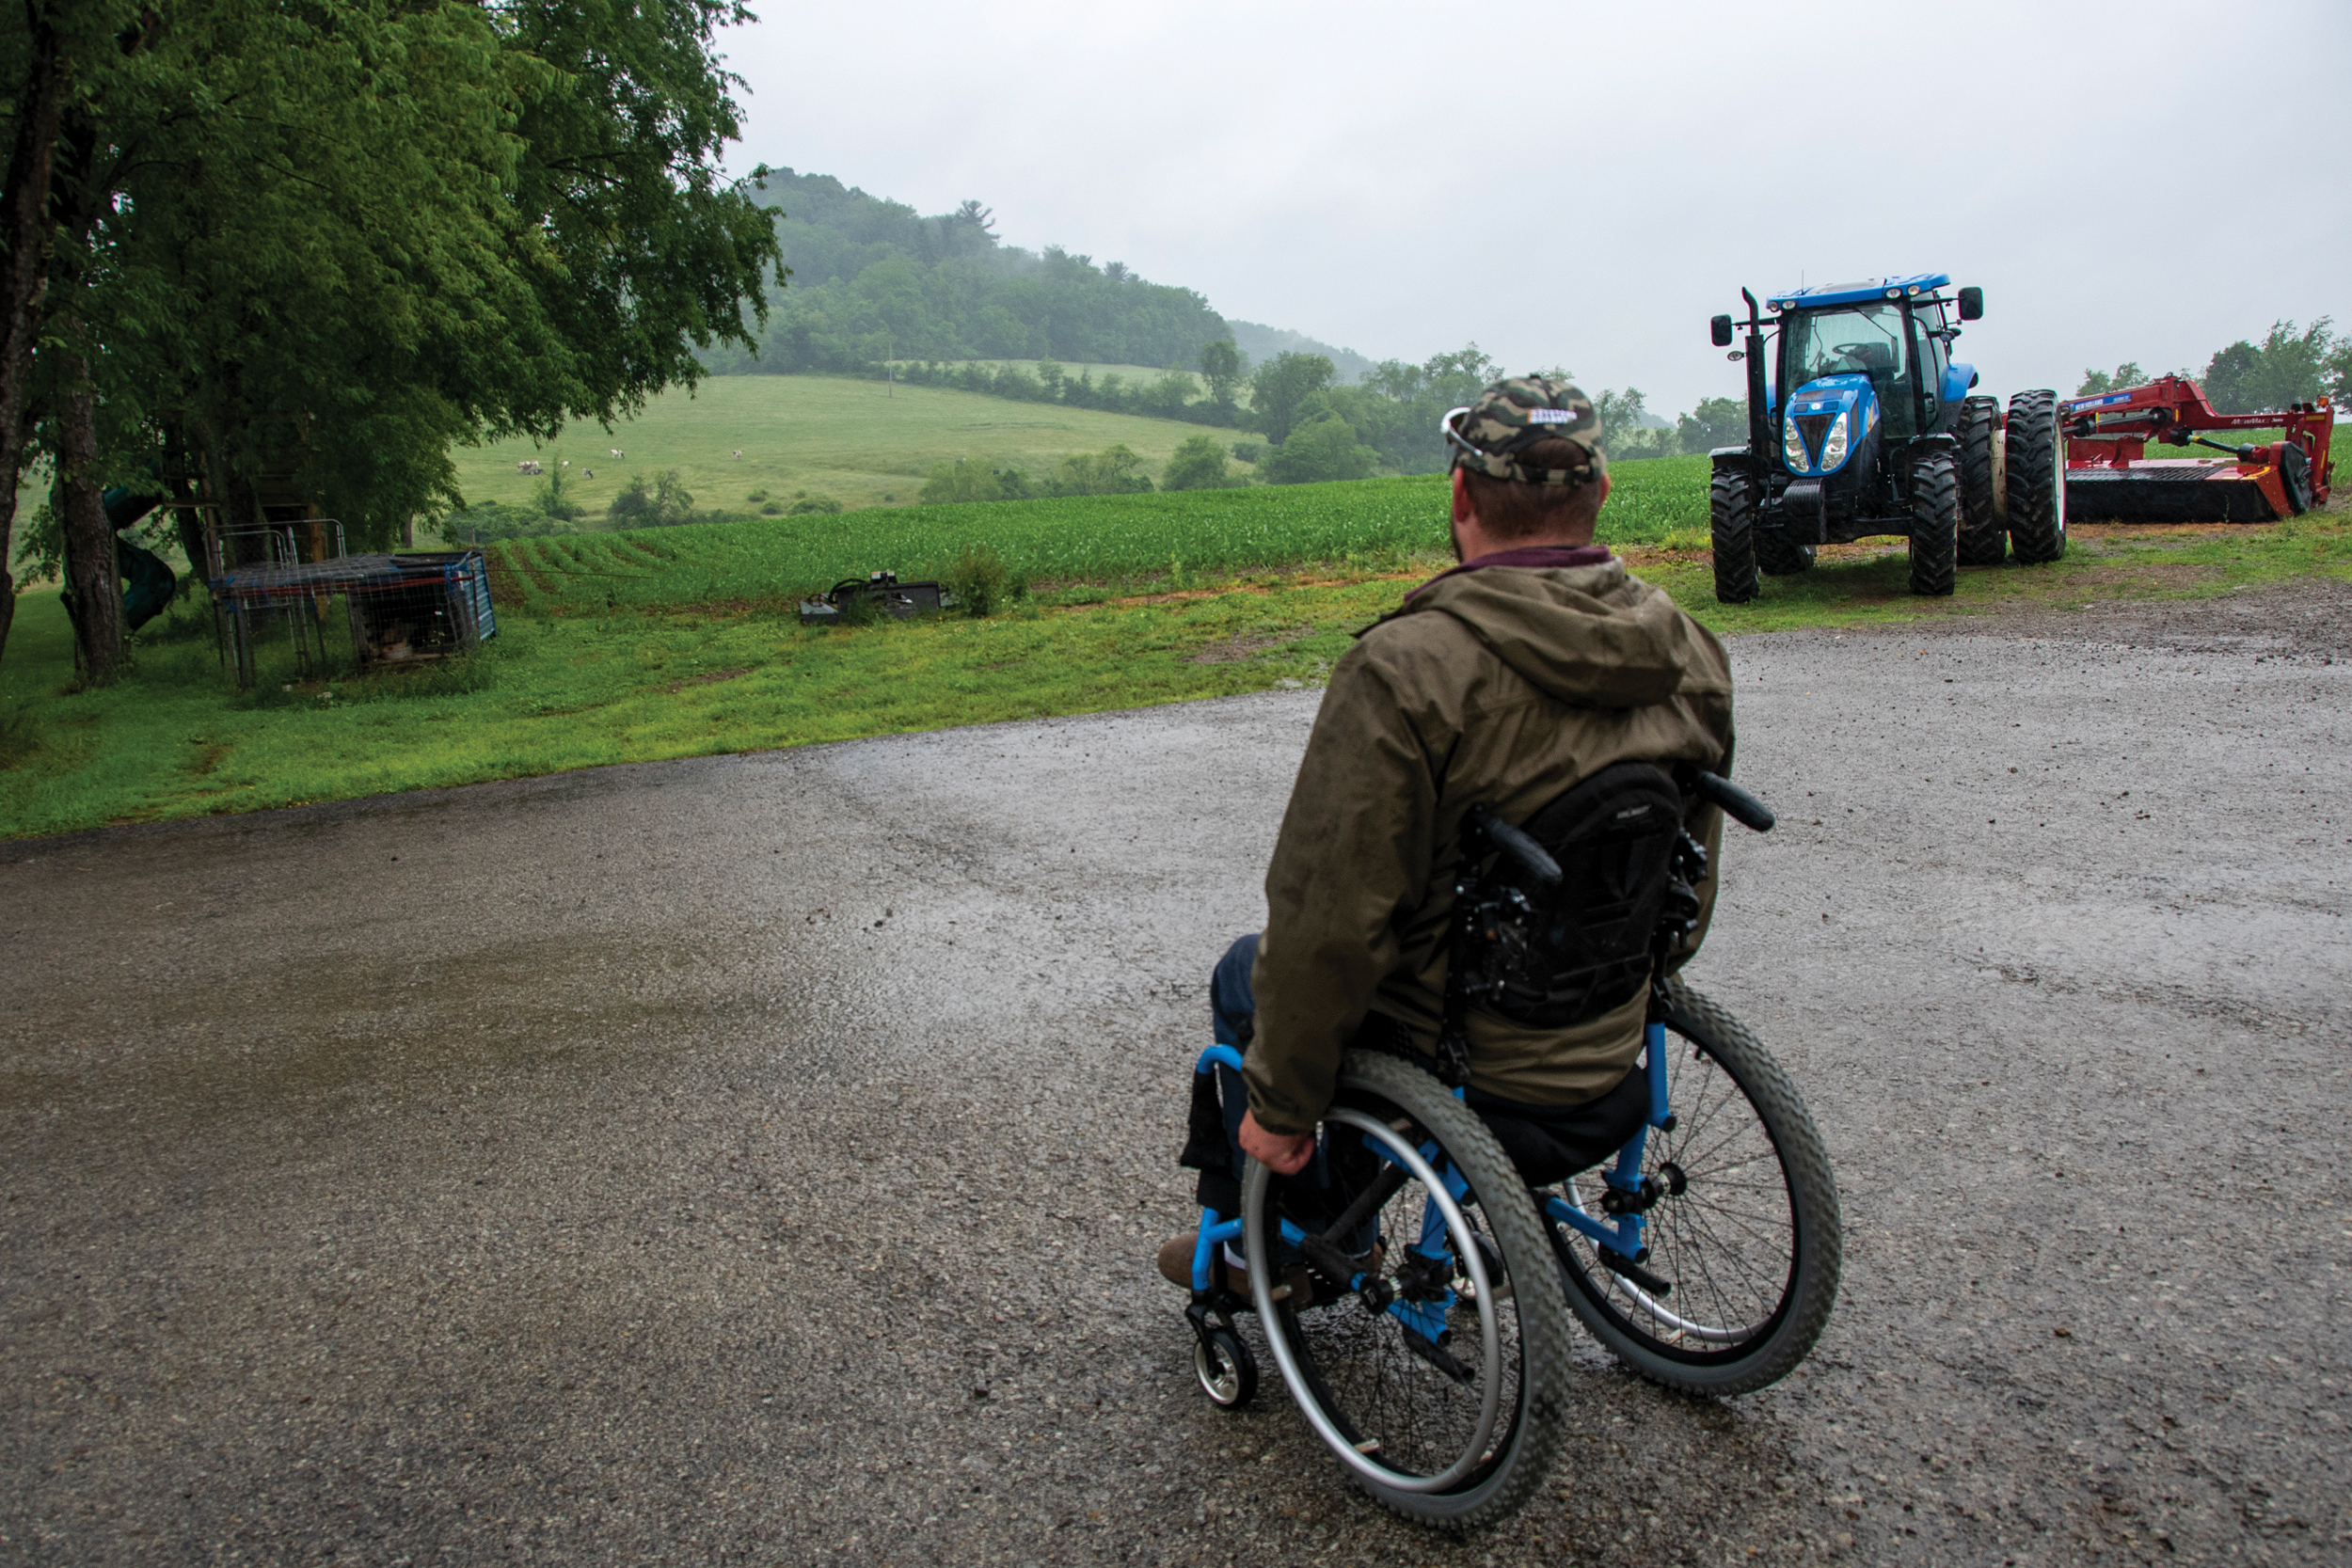 NEVER QUIT: Ryan Frye, who was paralyzed from the waist down at 19 after an ATV accident and spinal hematoma, wheels himself across the driveway adjacent to his corn field.